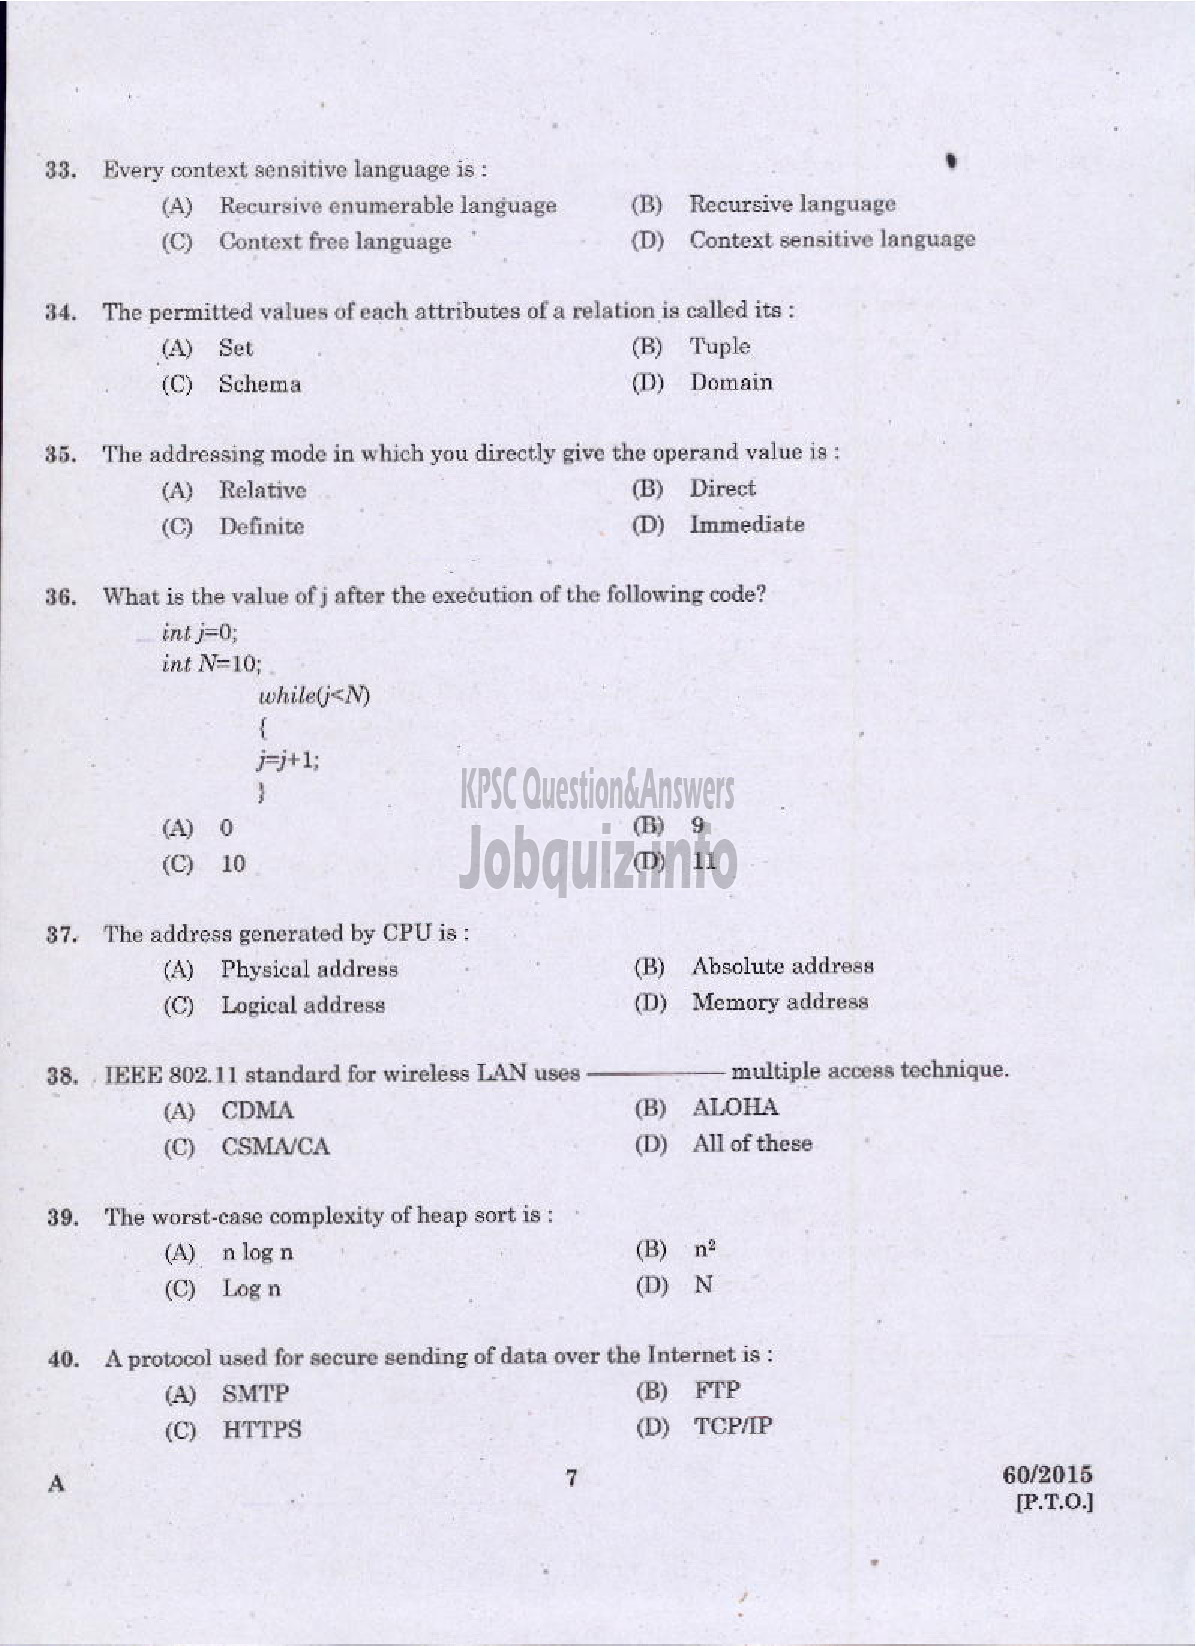 Kerala PSC Question Paper - COMPUTER PROGRAMMER TECHNICAL EDUCATION ENGINEERING COLLEGES-5